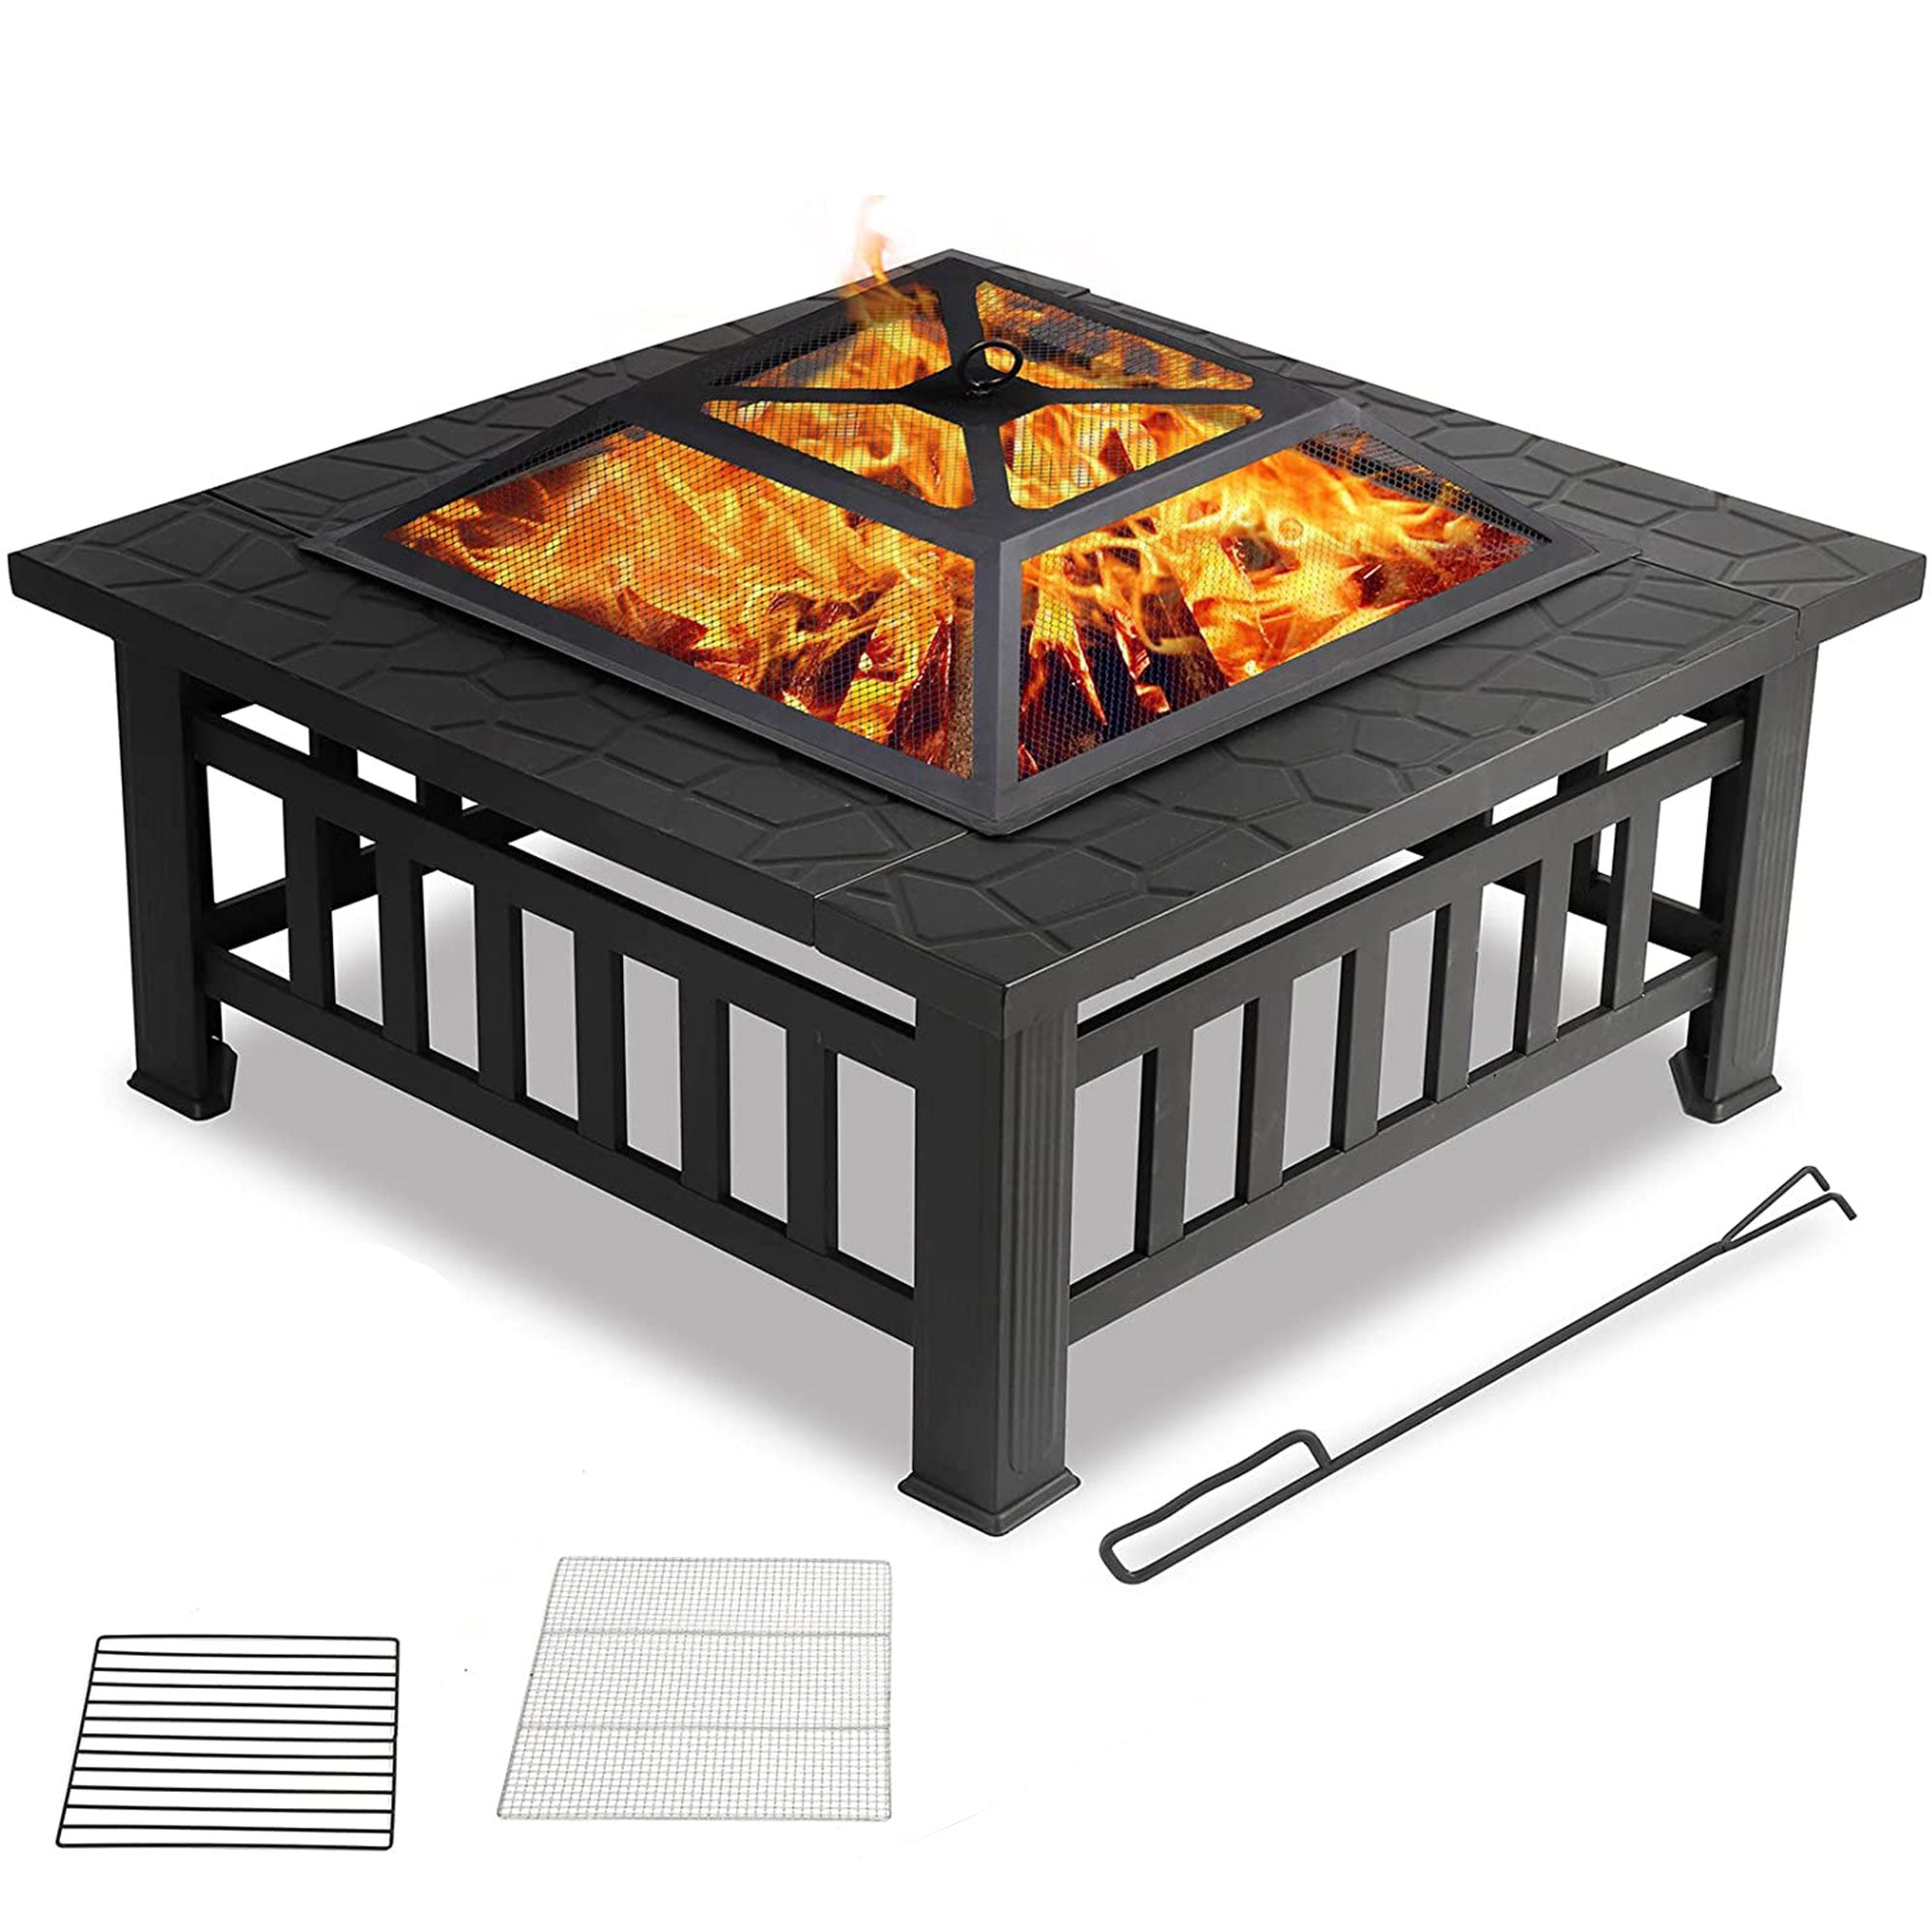 Portable 3IN1 Fire Pit BBQ Charcoal Grill Outdoor Fireplace Patio Garden Heater